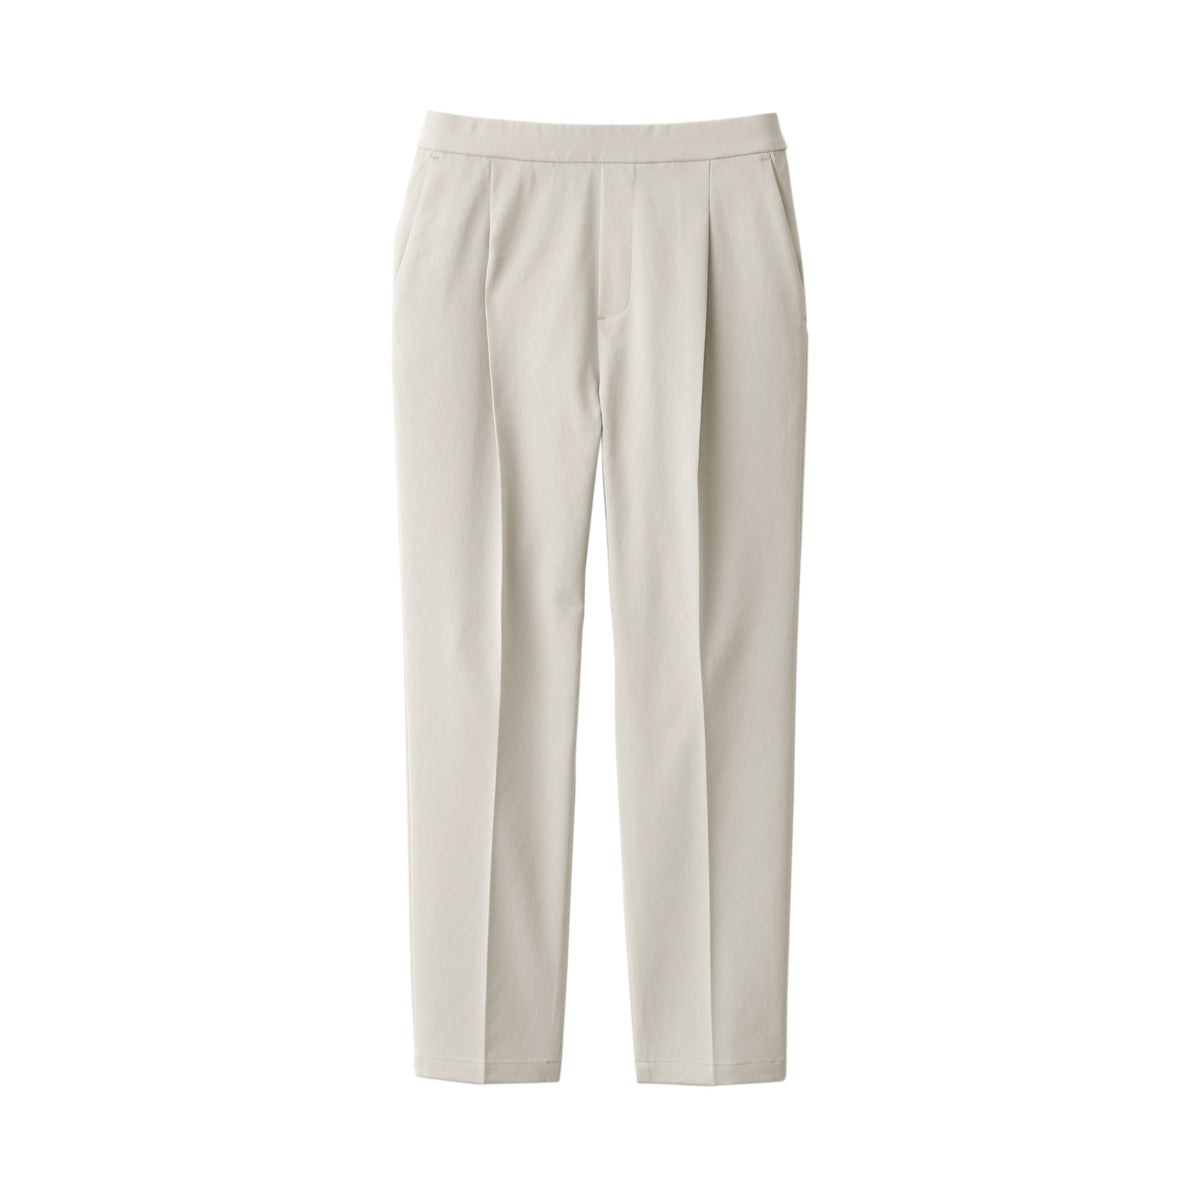 Women's Recycled Polyester Tapered Pants, Sustainable Fashion